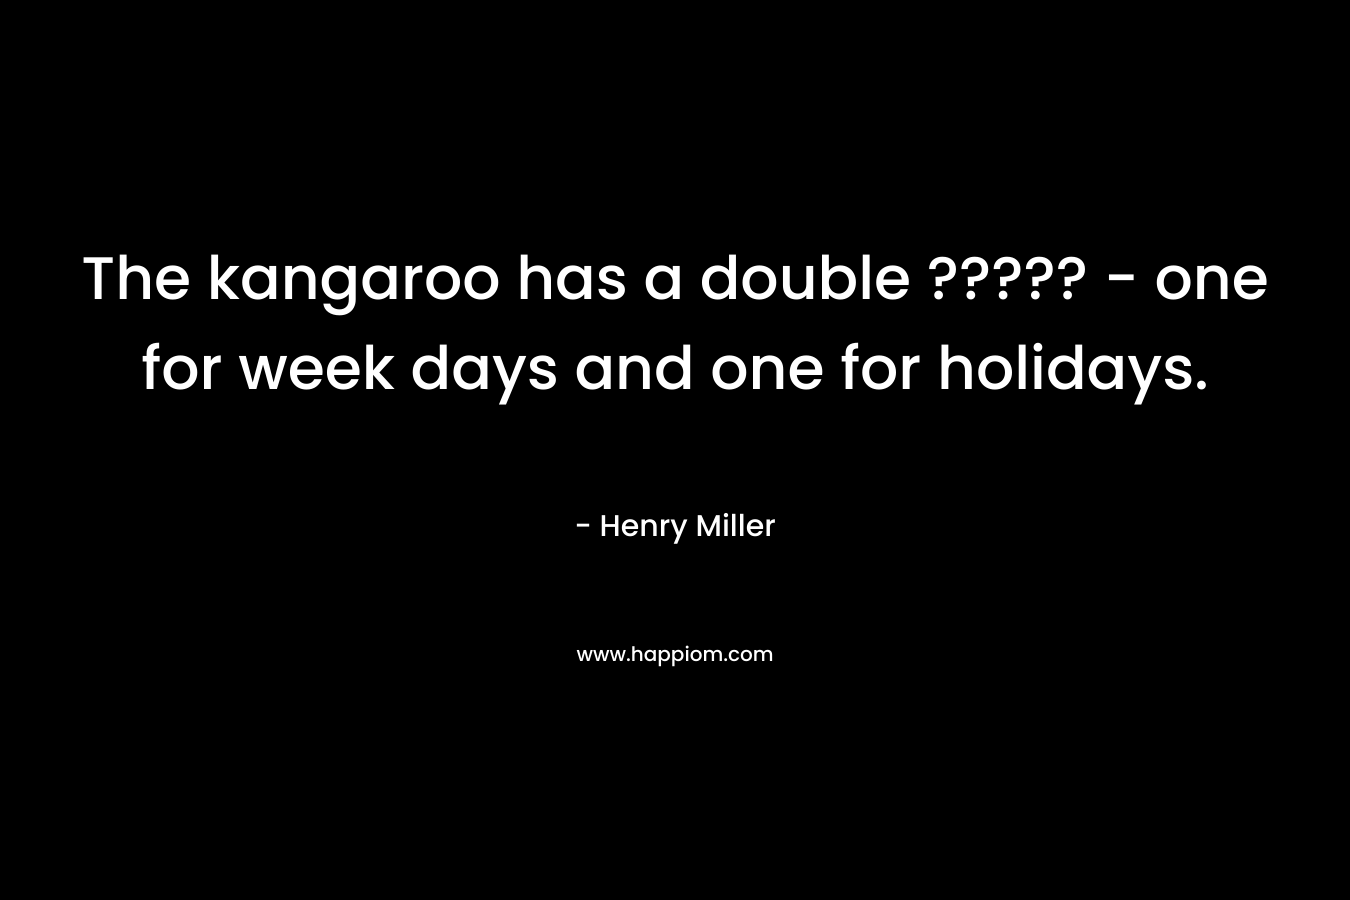 The kangaroo has a double ????? - one for week days and one for holidays.